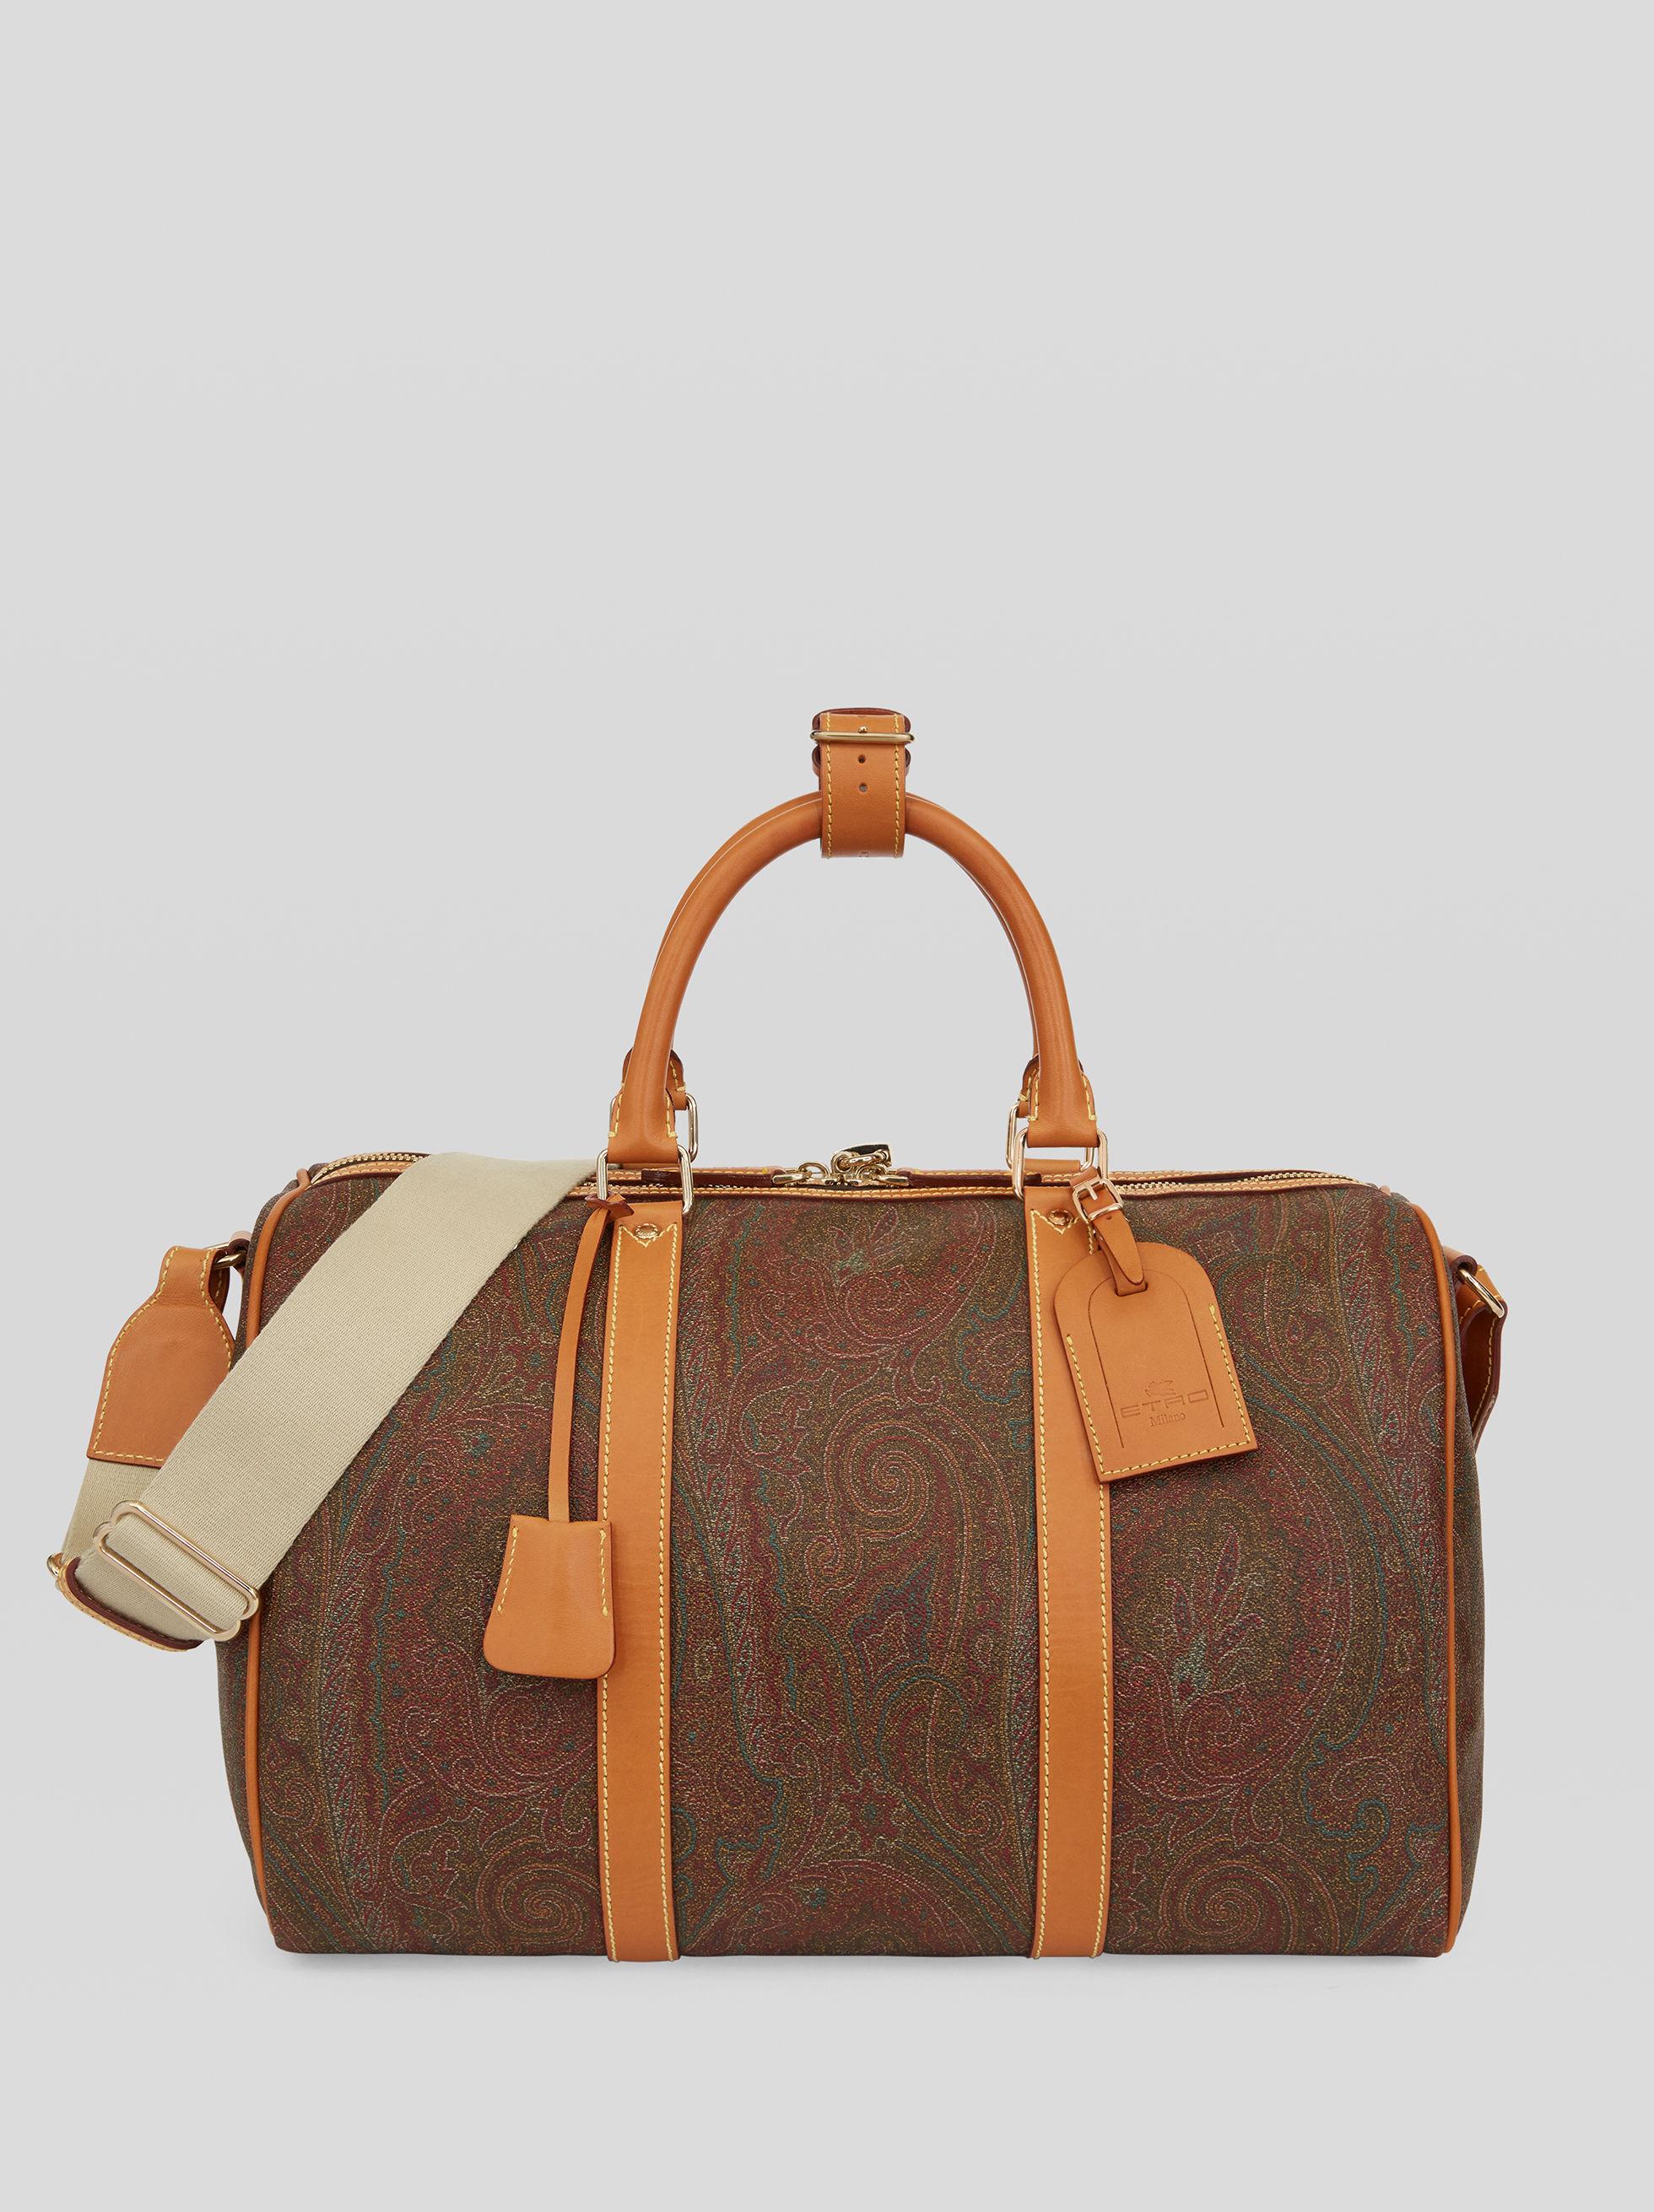 Etro Canvas Paisley Travel Bag in Brown for Men - Lyst